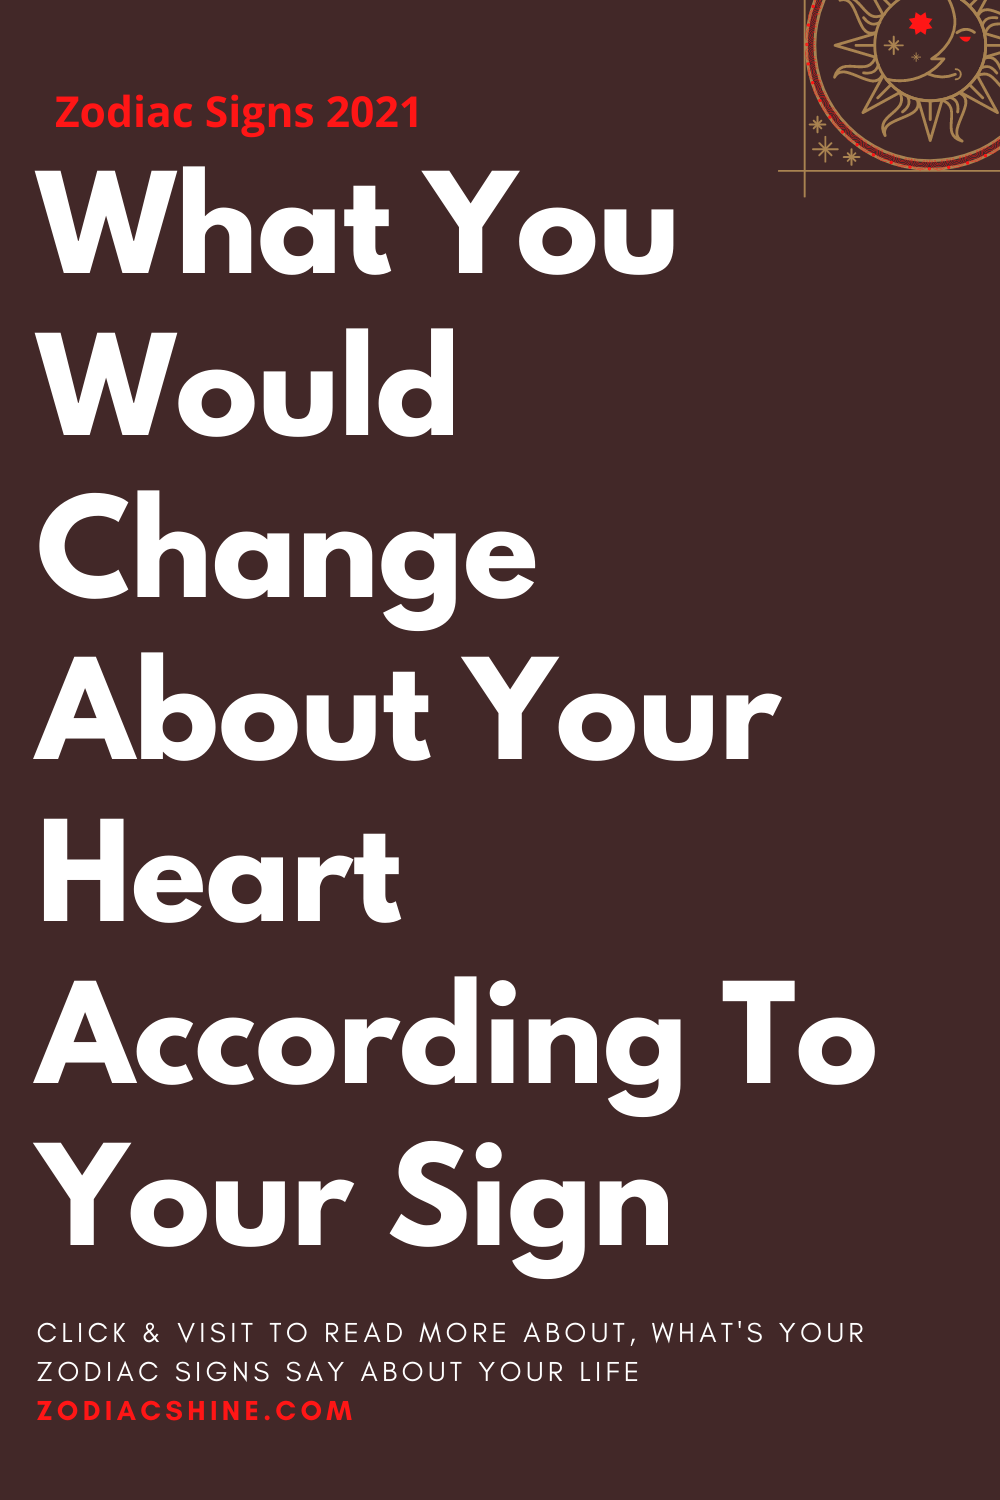 What You Would Change About Your Heart According To Your Sign